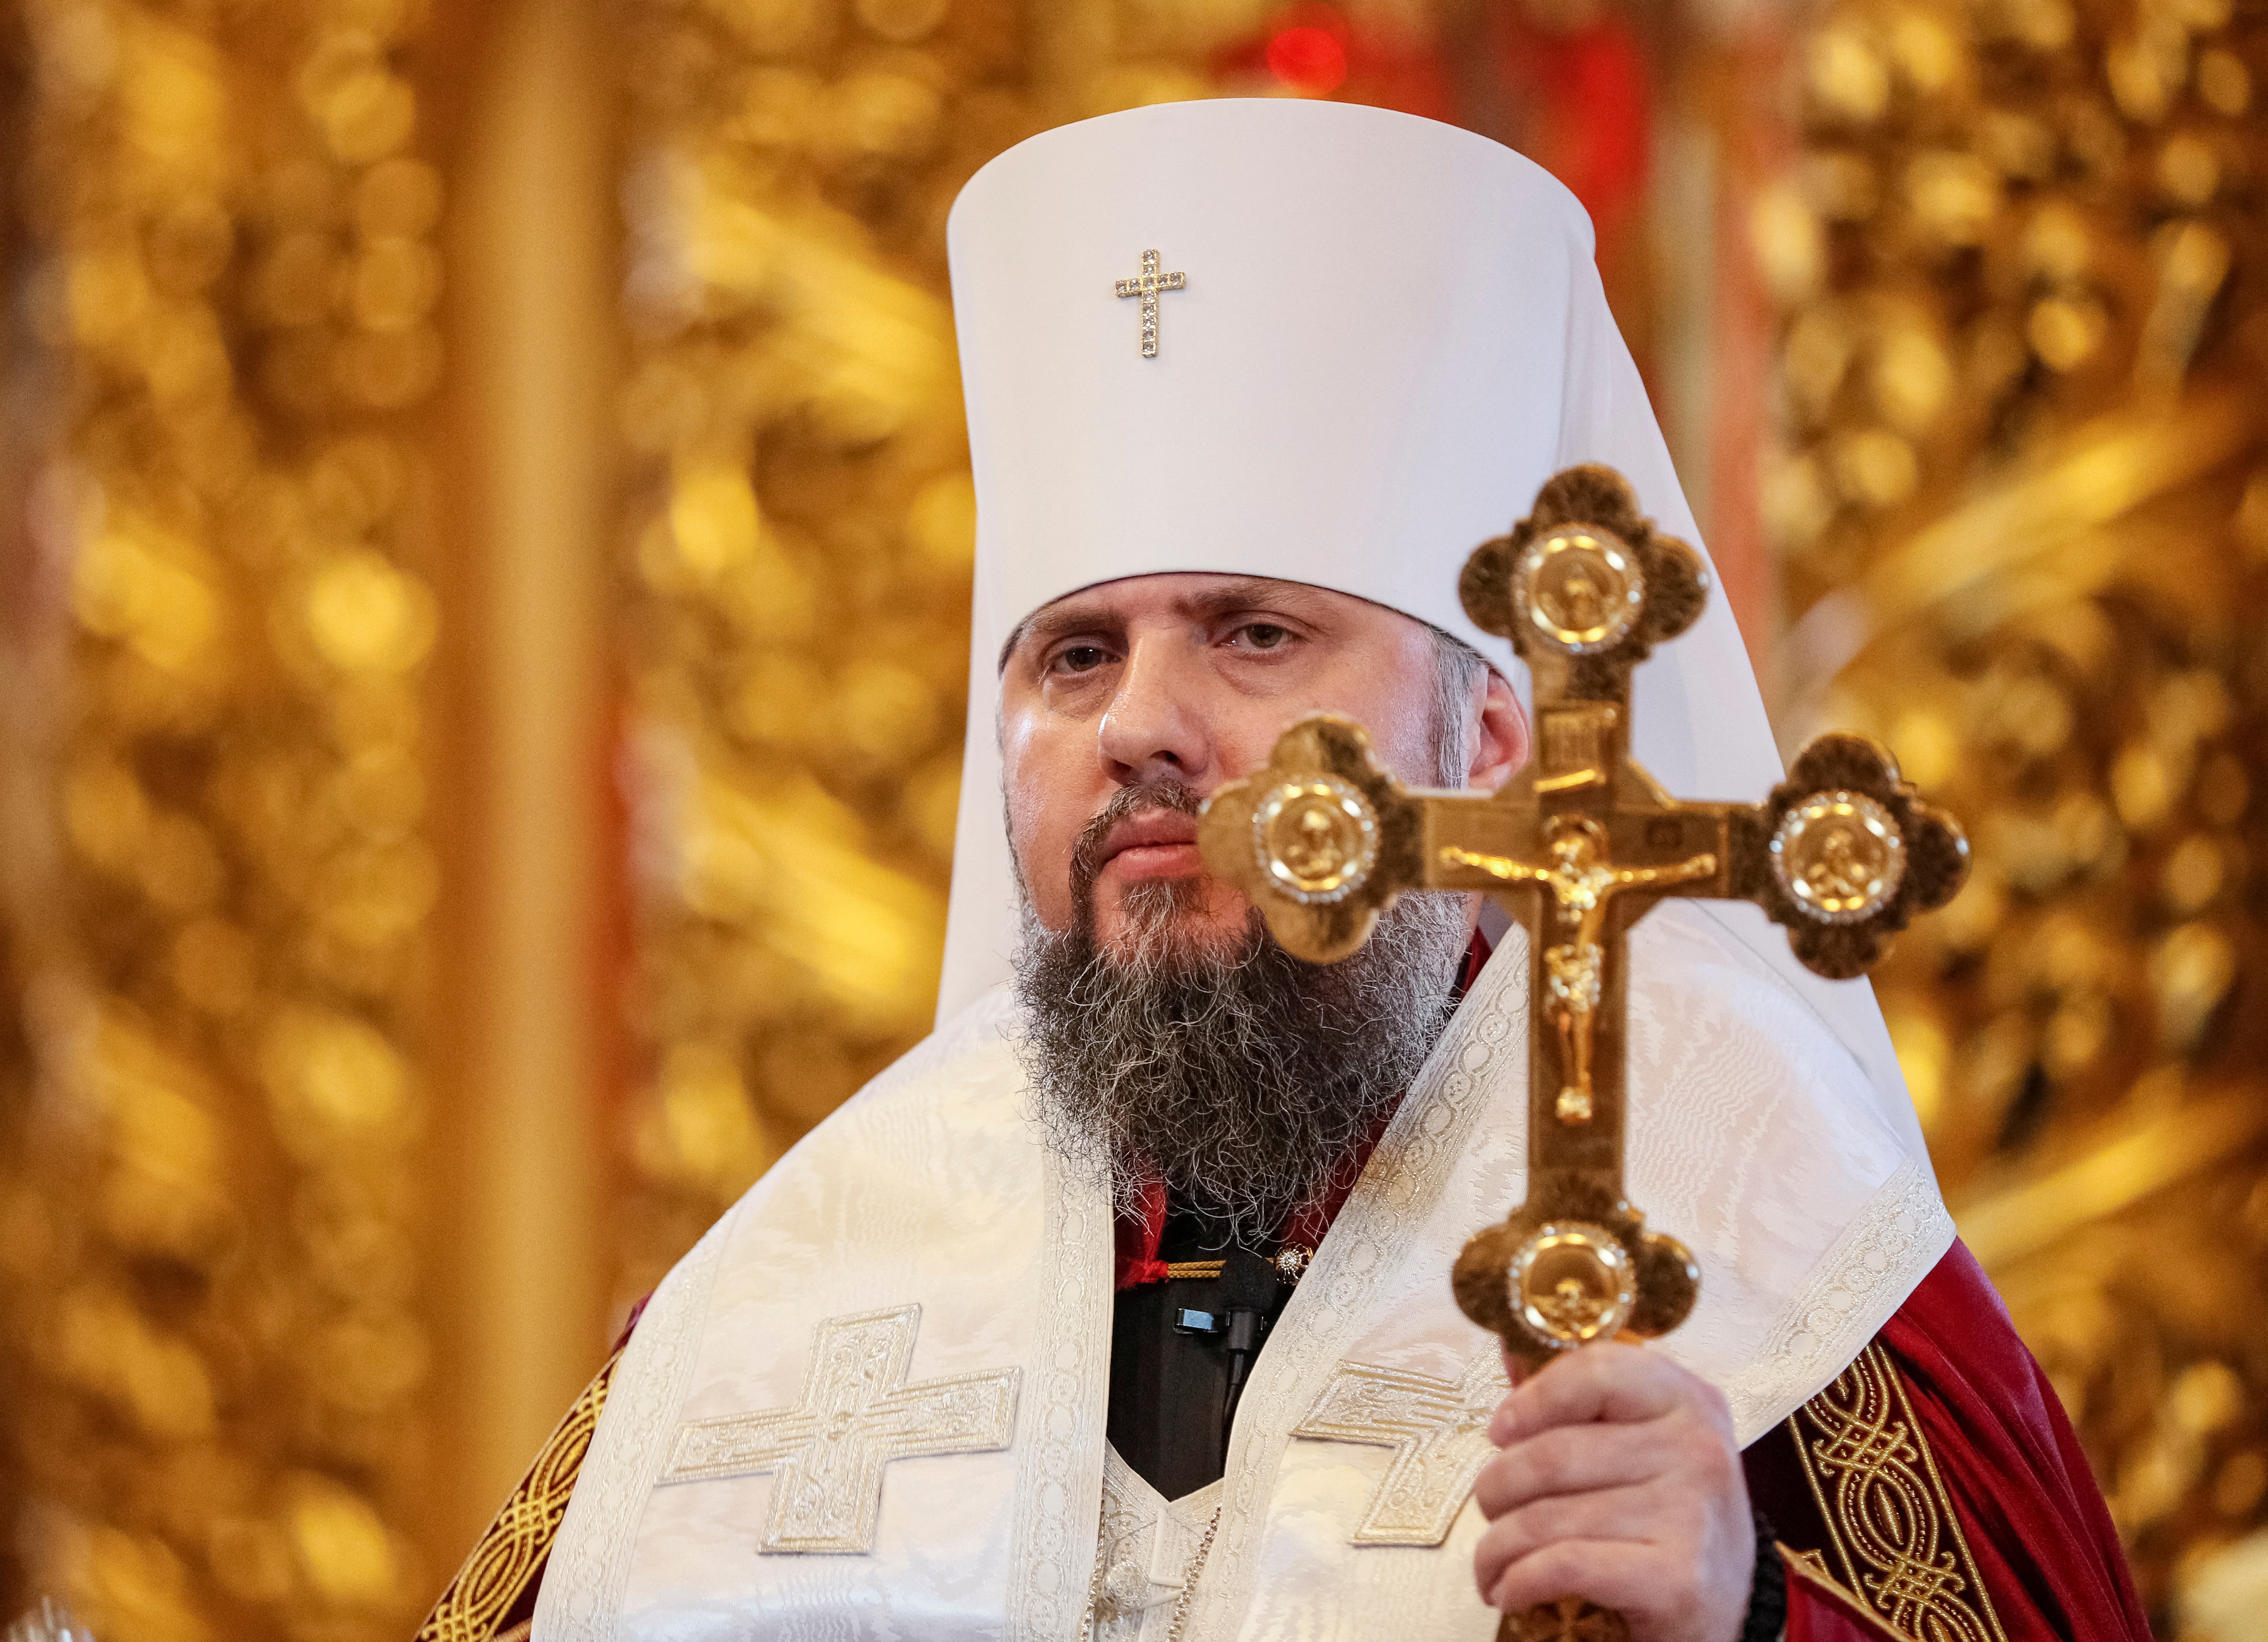 Head of Ukraine’s Orthodox Church Asks Clergy, Faithful Not to Attend Snight Easter Services